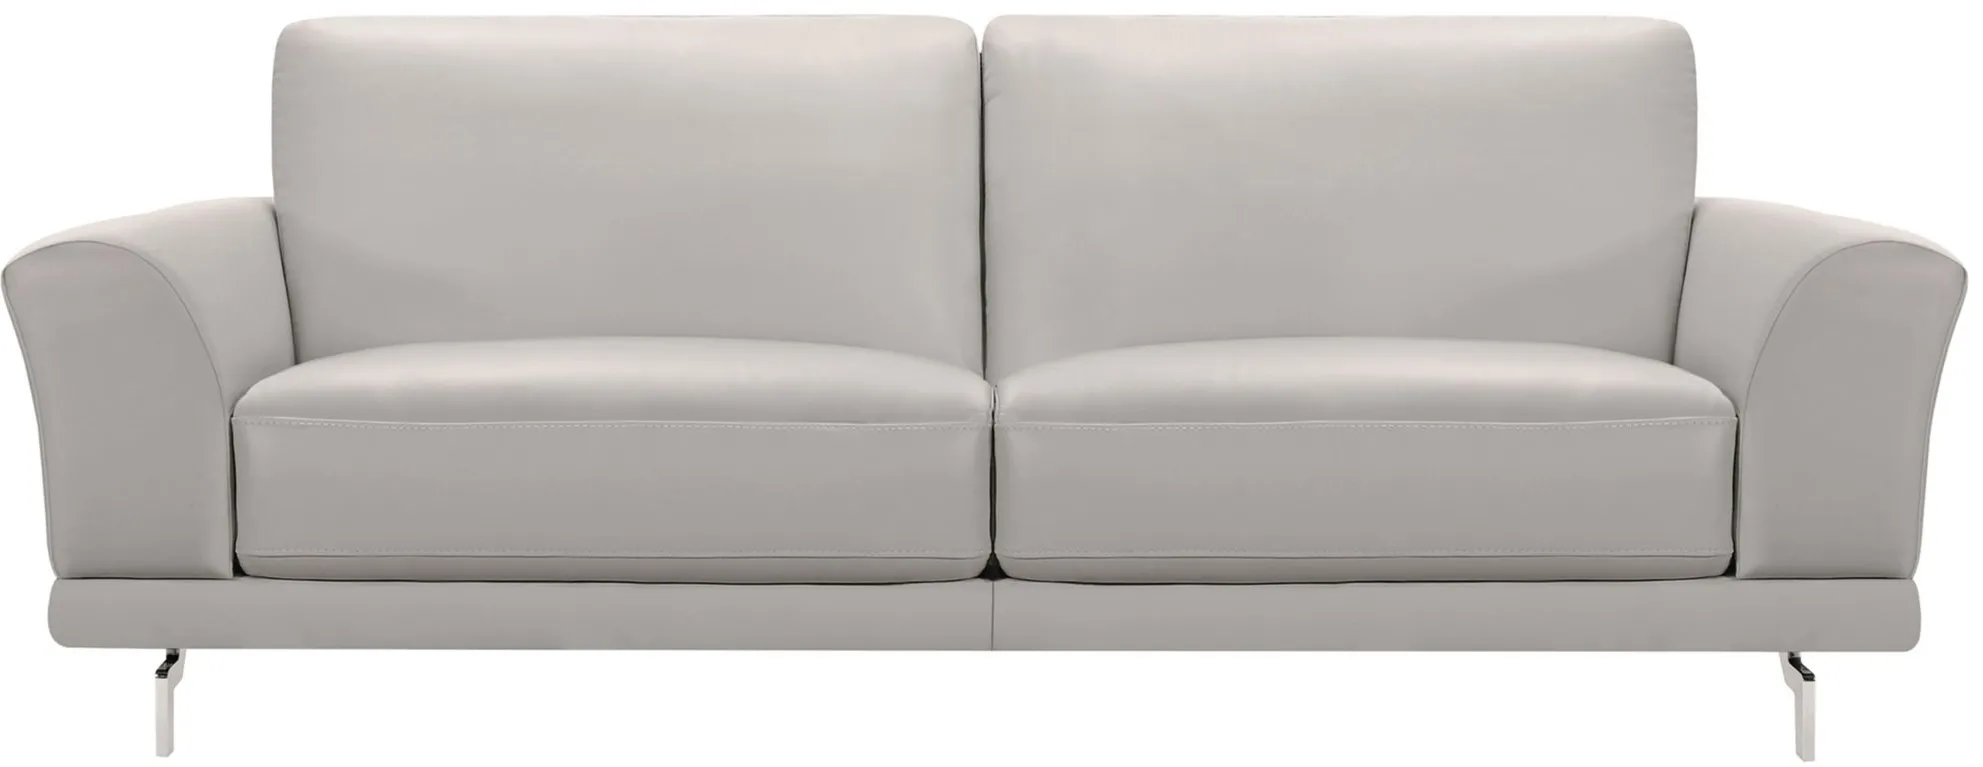 Everly Sofa in Dove Gray by Armen Living